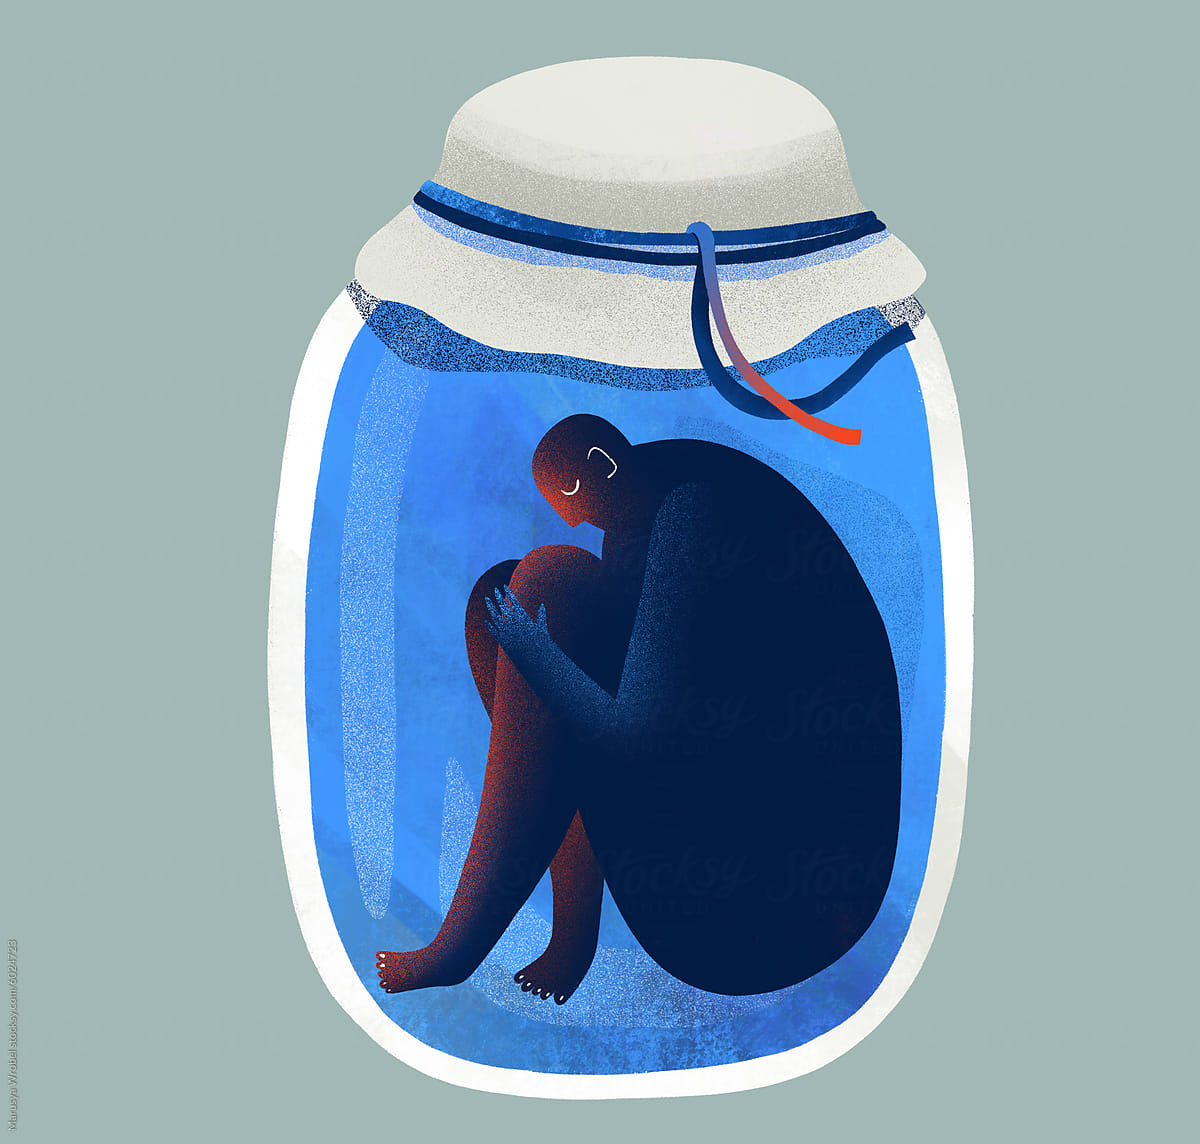 Embrace in a Jar — A Symbolic Illustration of Isolation